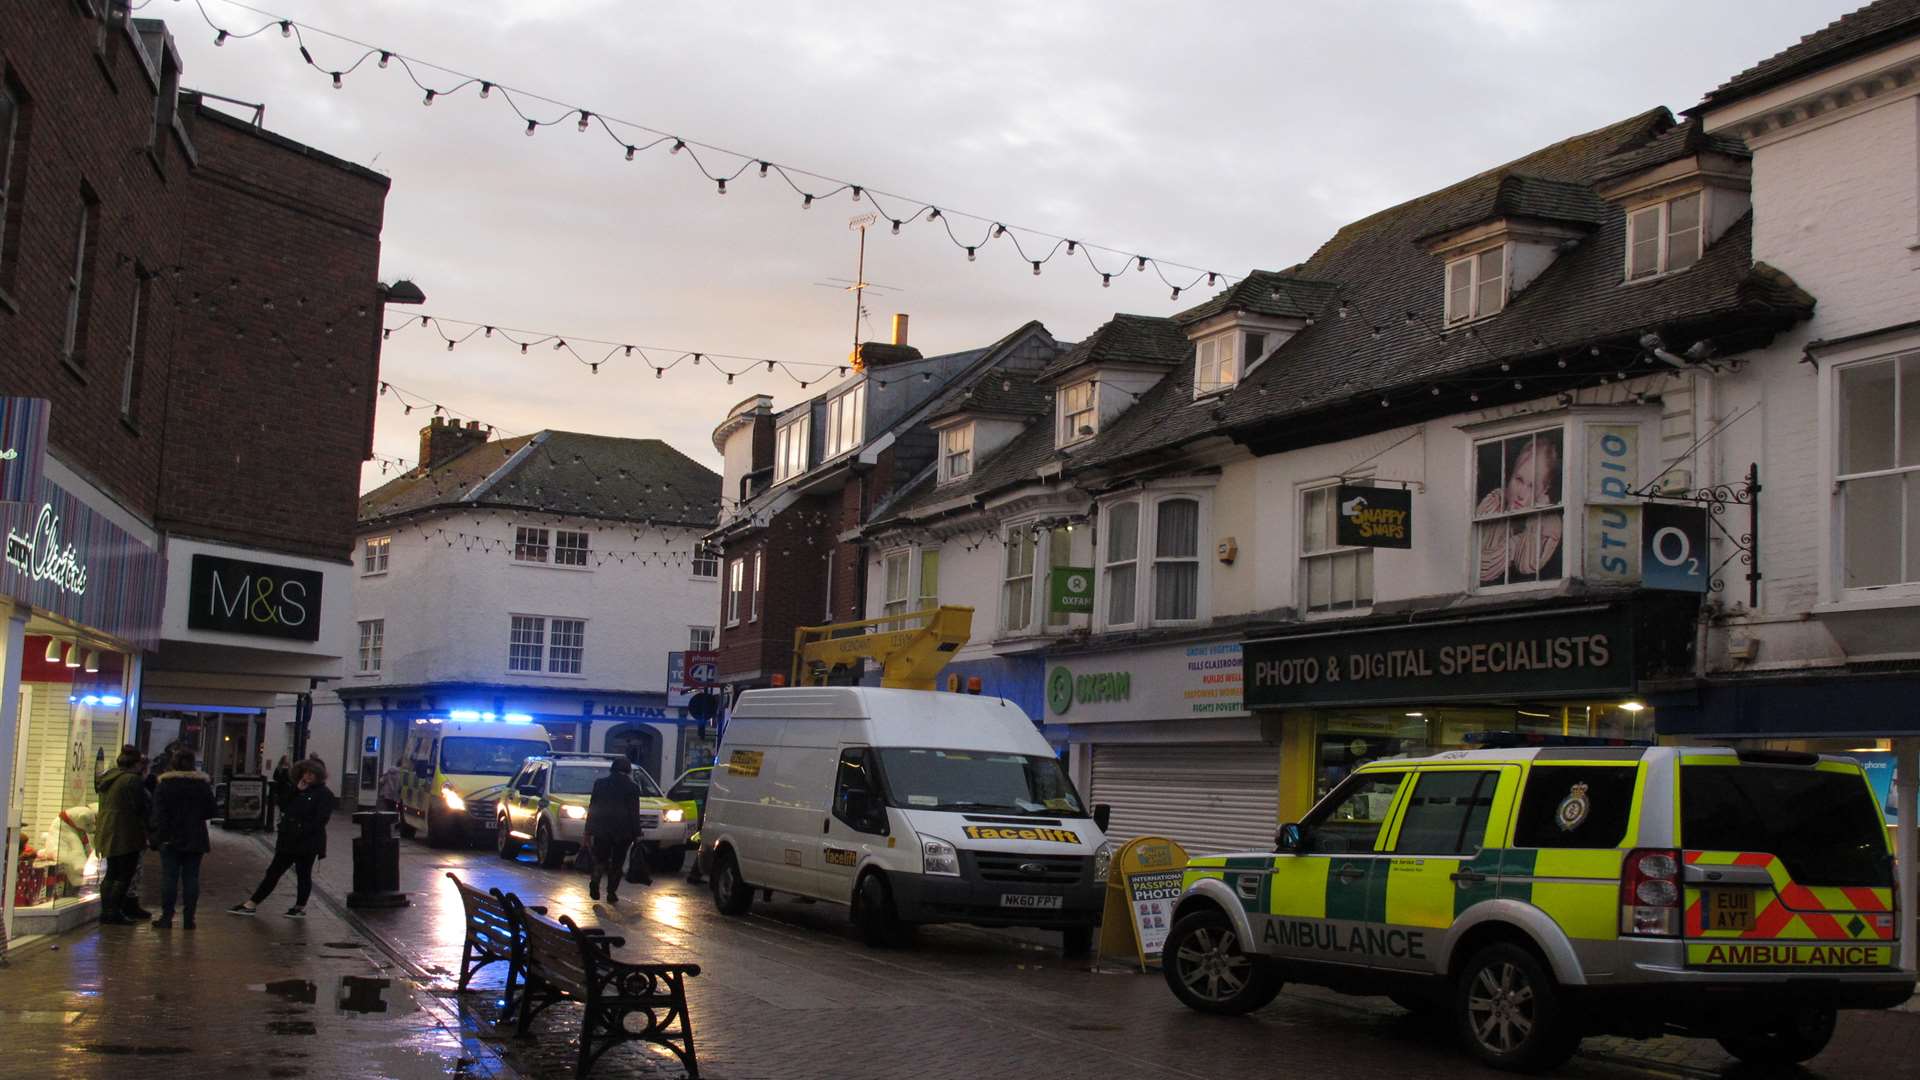 A worker fell while putting up Ashford's Christmas lights.